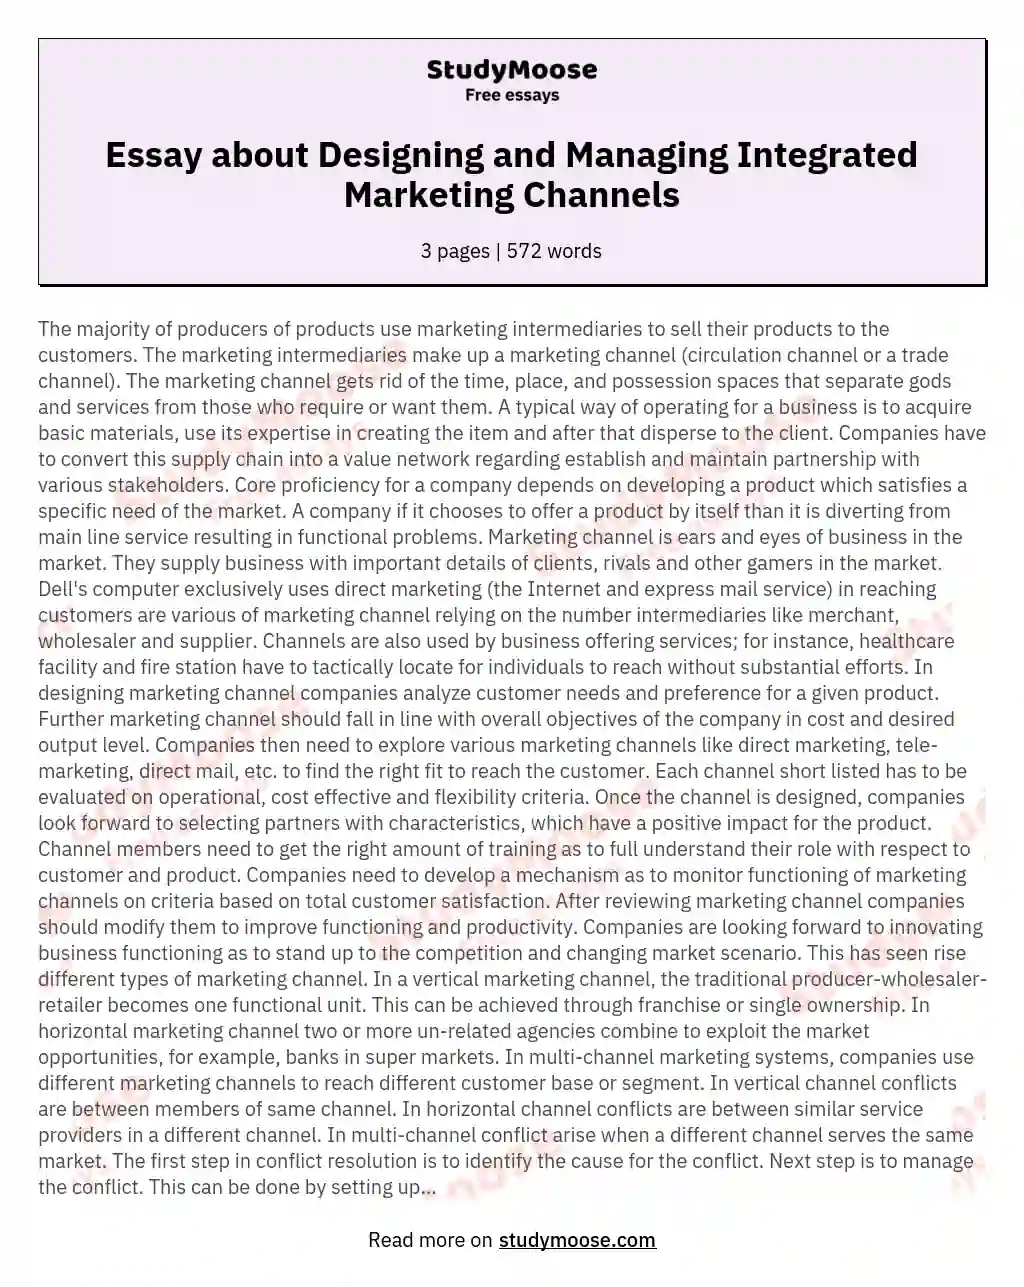 Essay about Designing and Managing Integrated Marketing Channels essay